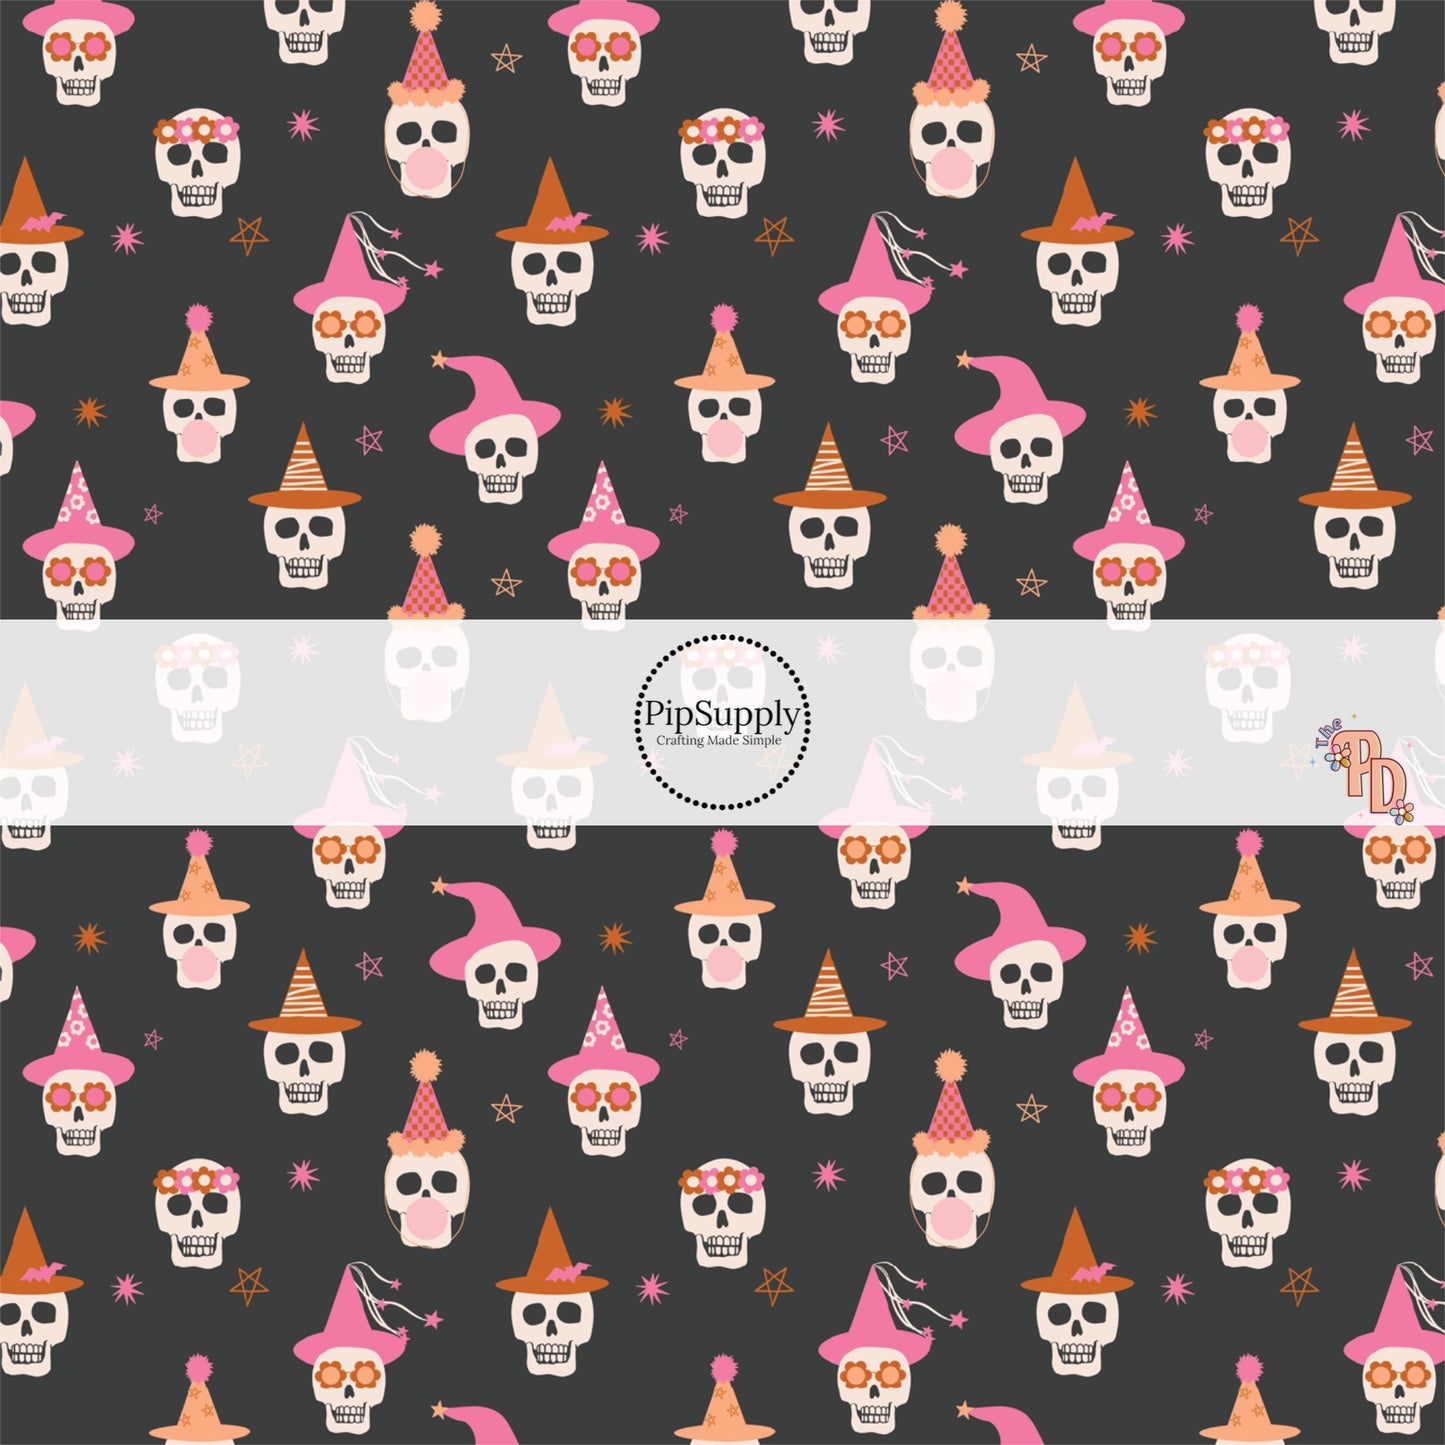 Skeletons with party hats and balloons on black hair bow strips 